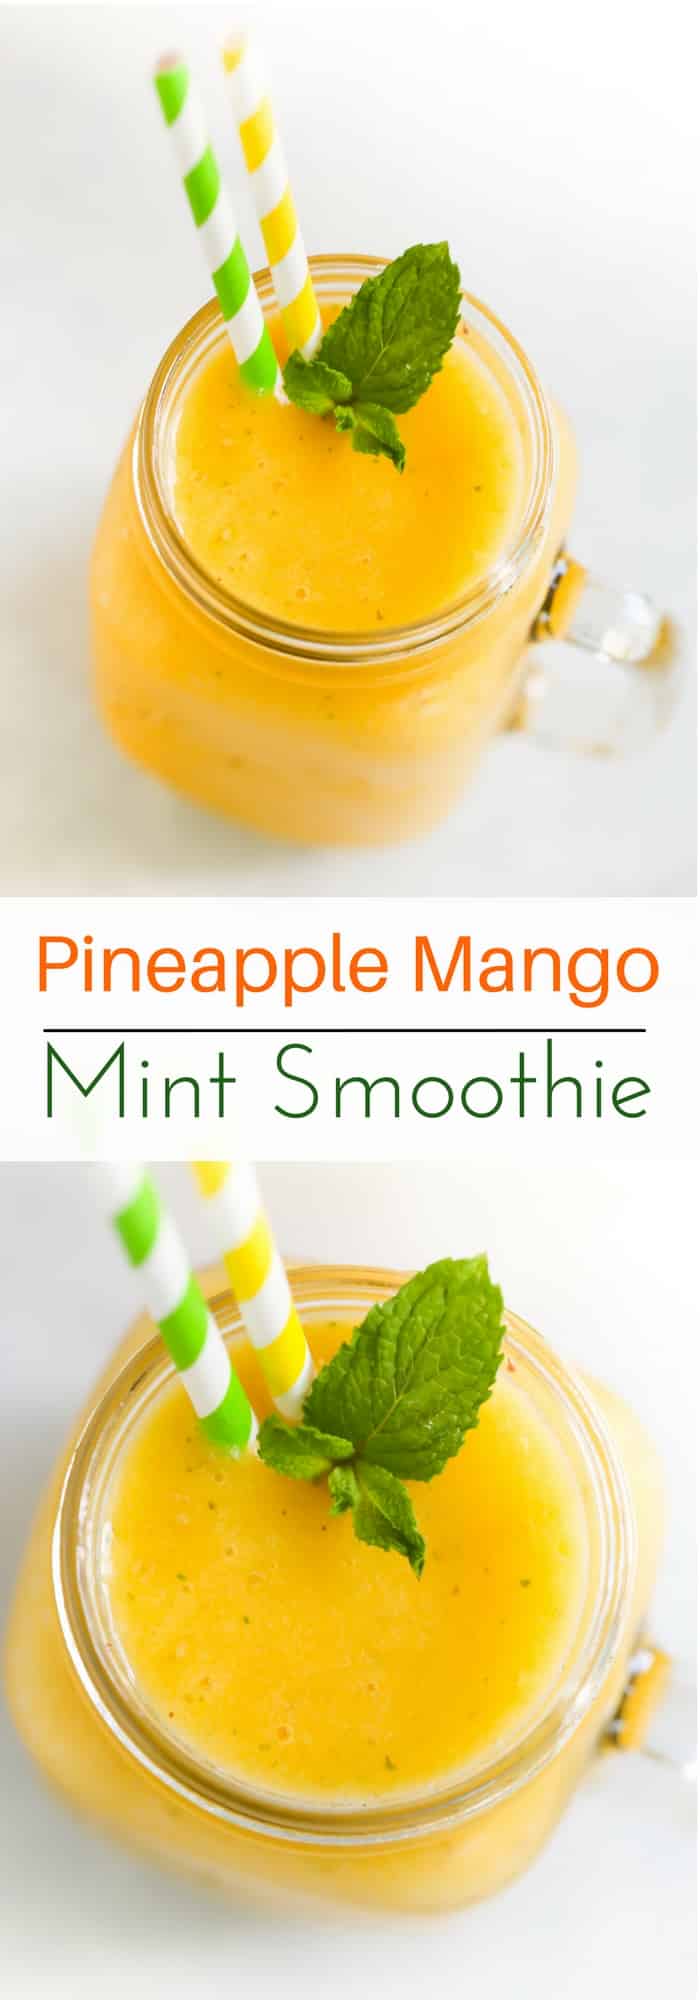 Pineapple Mango Mint Smoothie - Fresh Pineapple Mango Mint Smoothie to enjoy during summer. It only requires 4-ingredients and a blender. Enjoy!